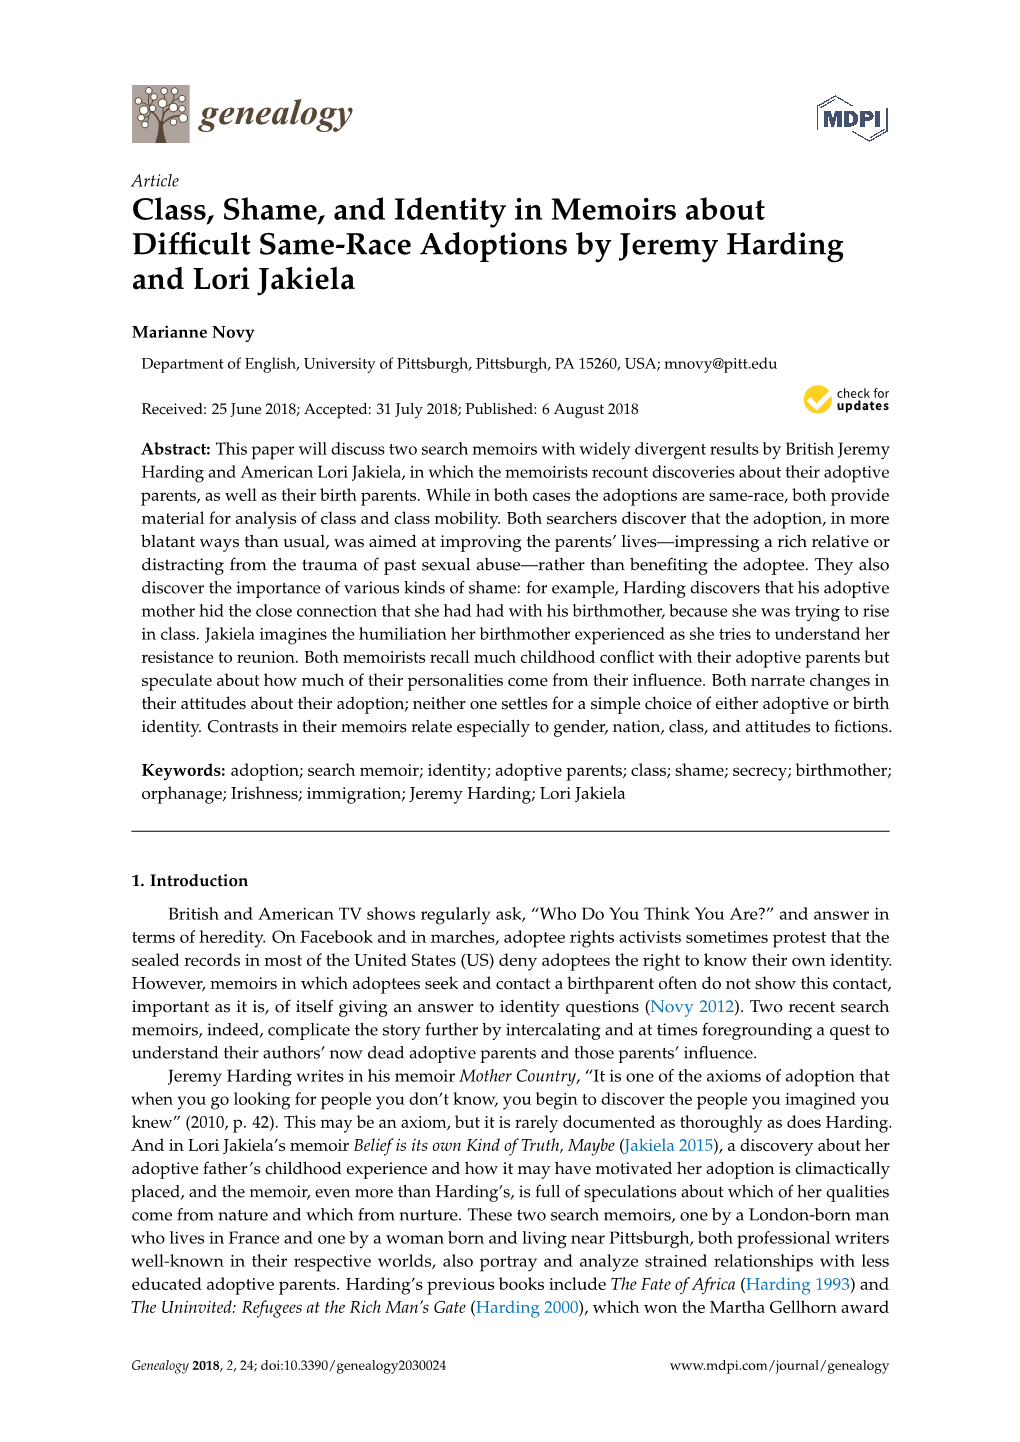 Class, Shame, and Identity in Memoirs About Difficult Same-Race Adoptions by Jeremy Harding and Lori Jakiela